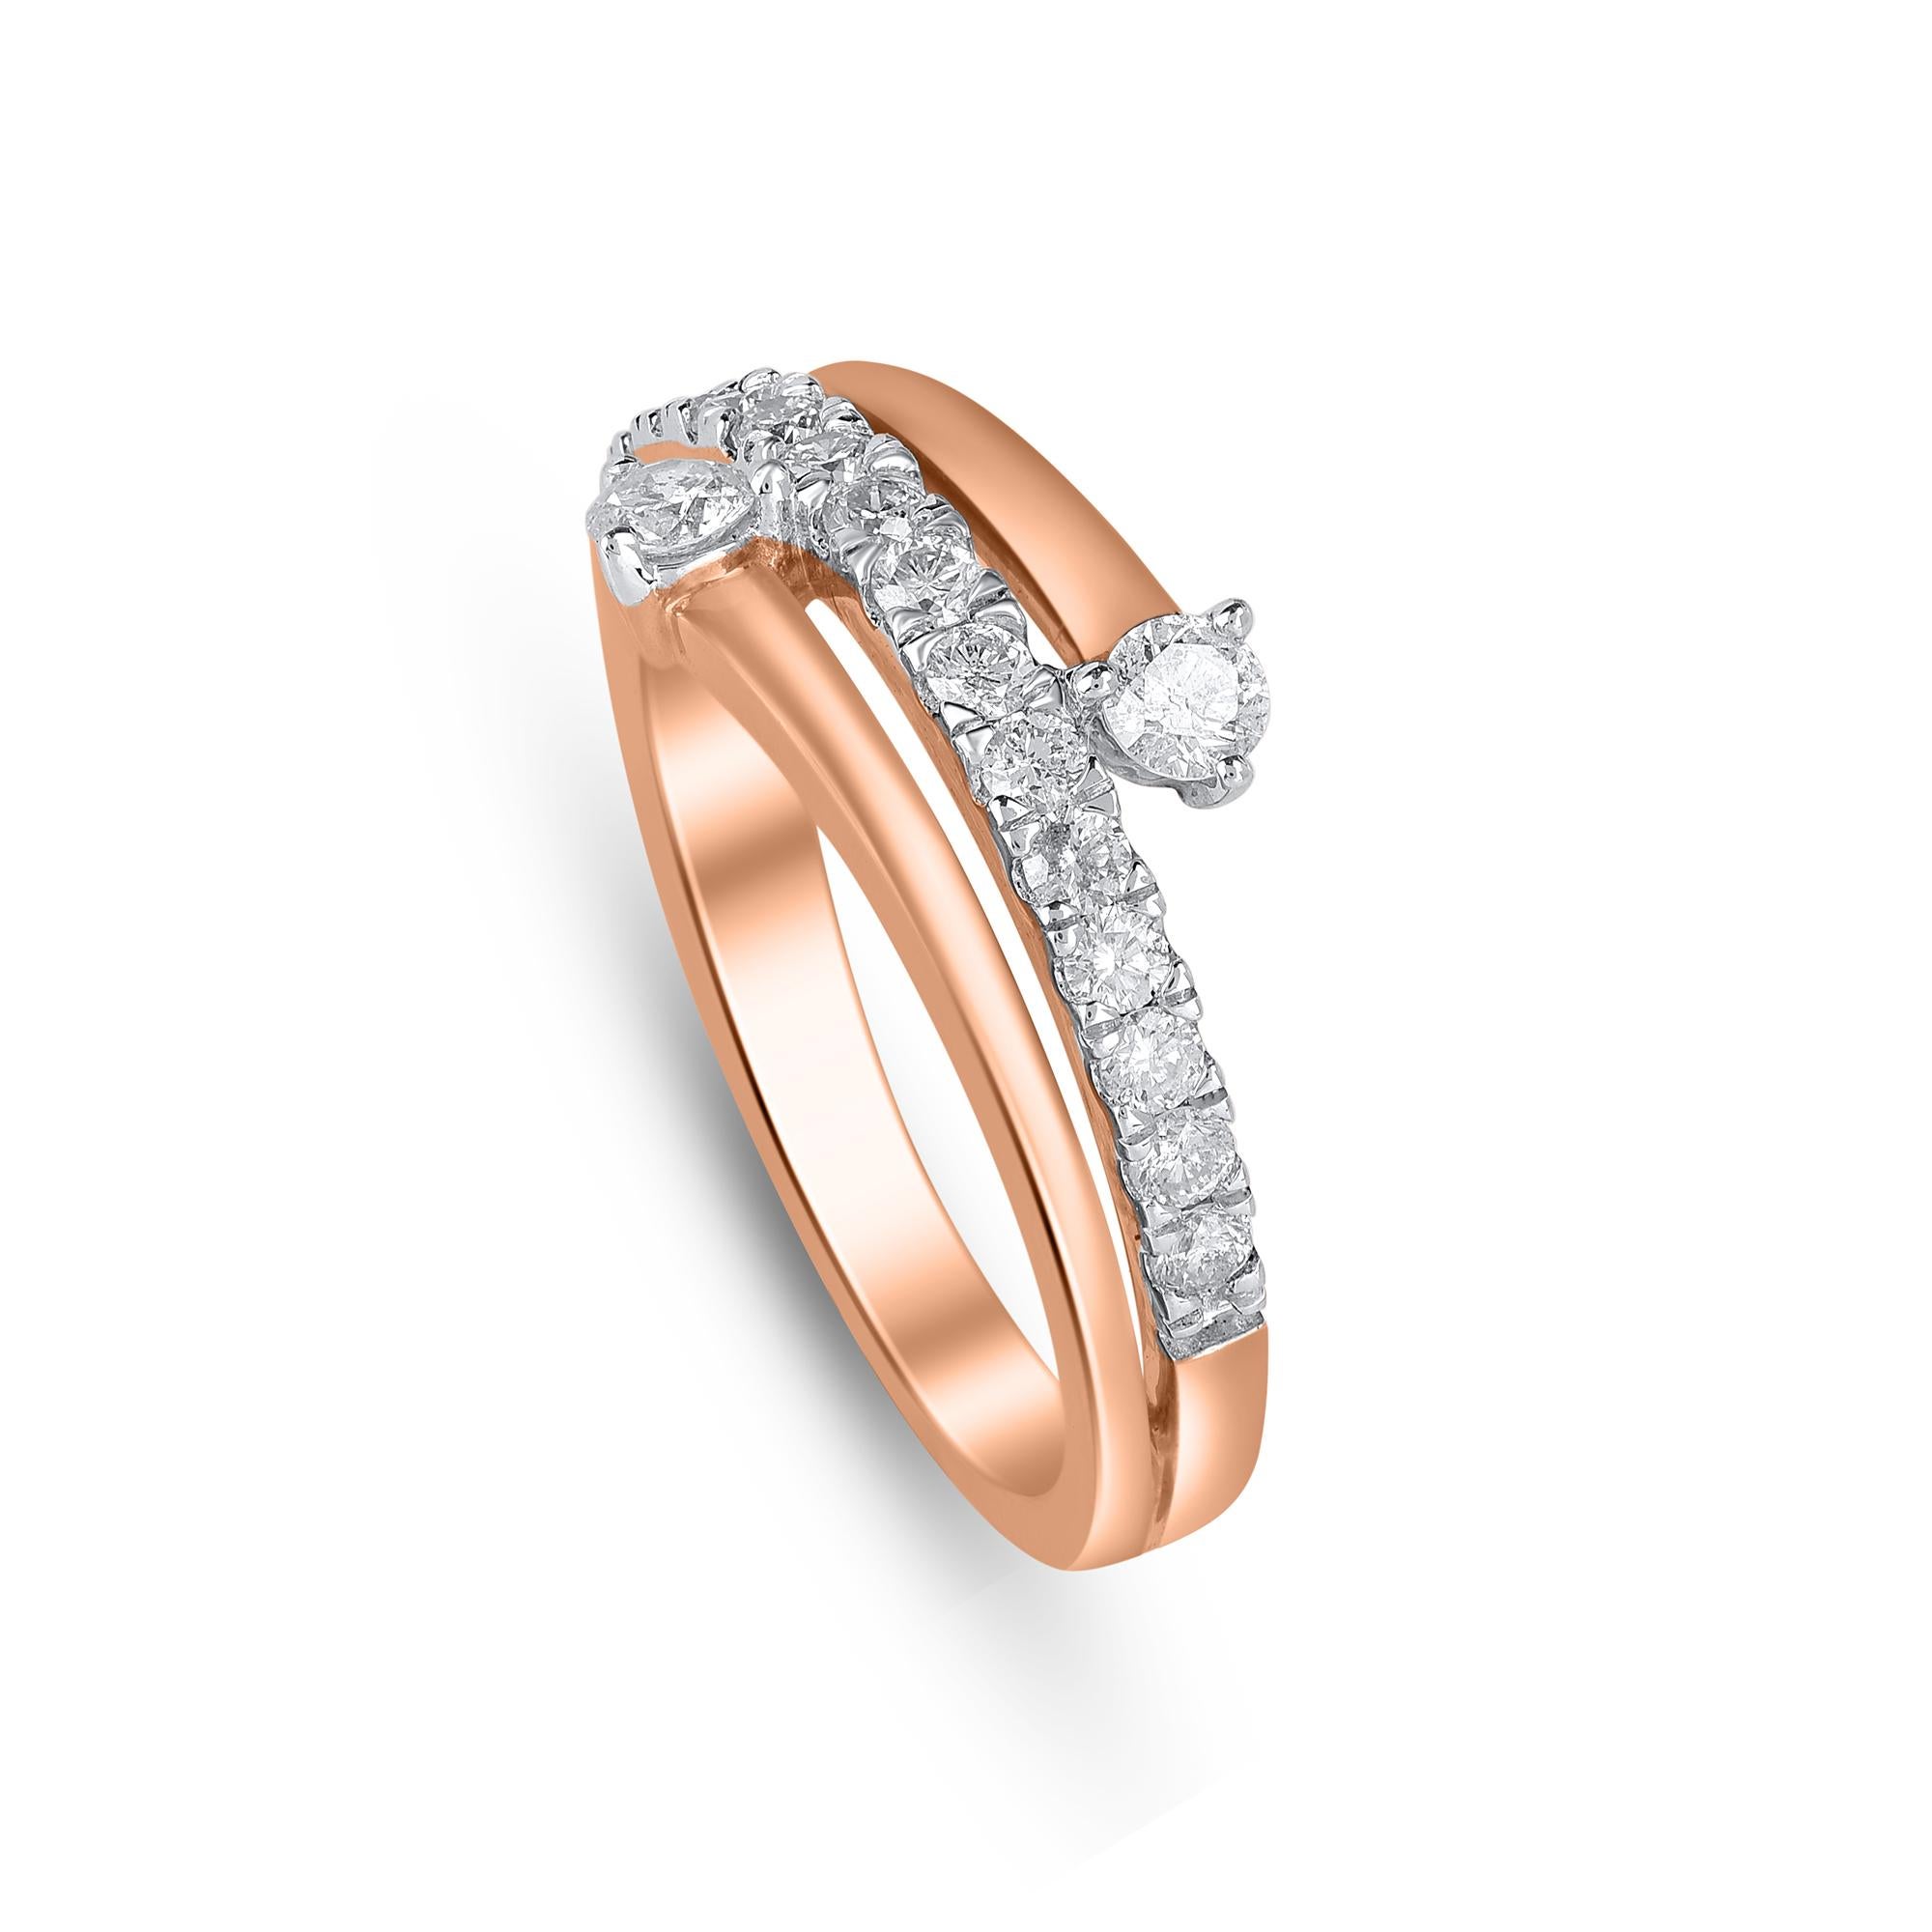 Sure to become an instant favorite, this sparking diamond bypass wedding band celebrates your romance. The ring is crafted from 14-karat gold in your choice of white, rose, or yellow, and features round brilliant 17 diamonds, prong set, H-I color I2